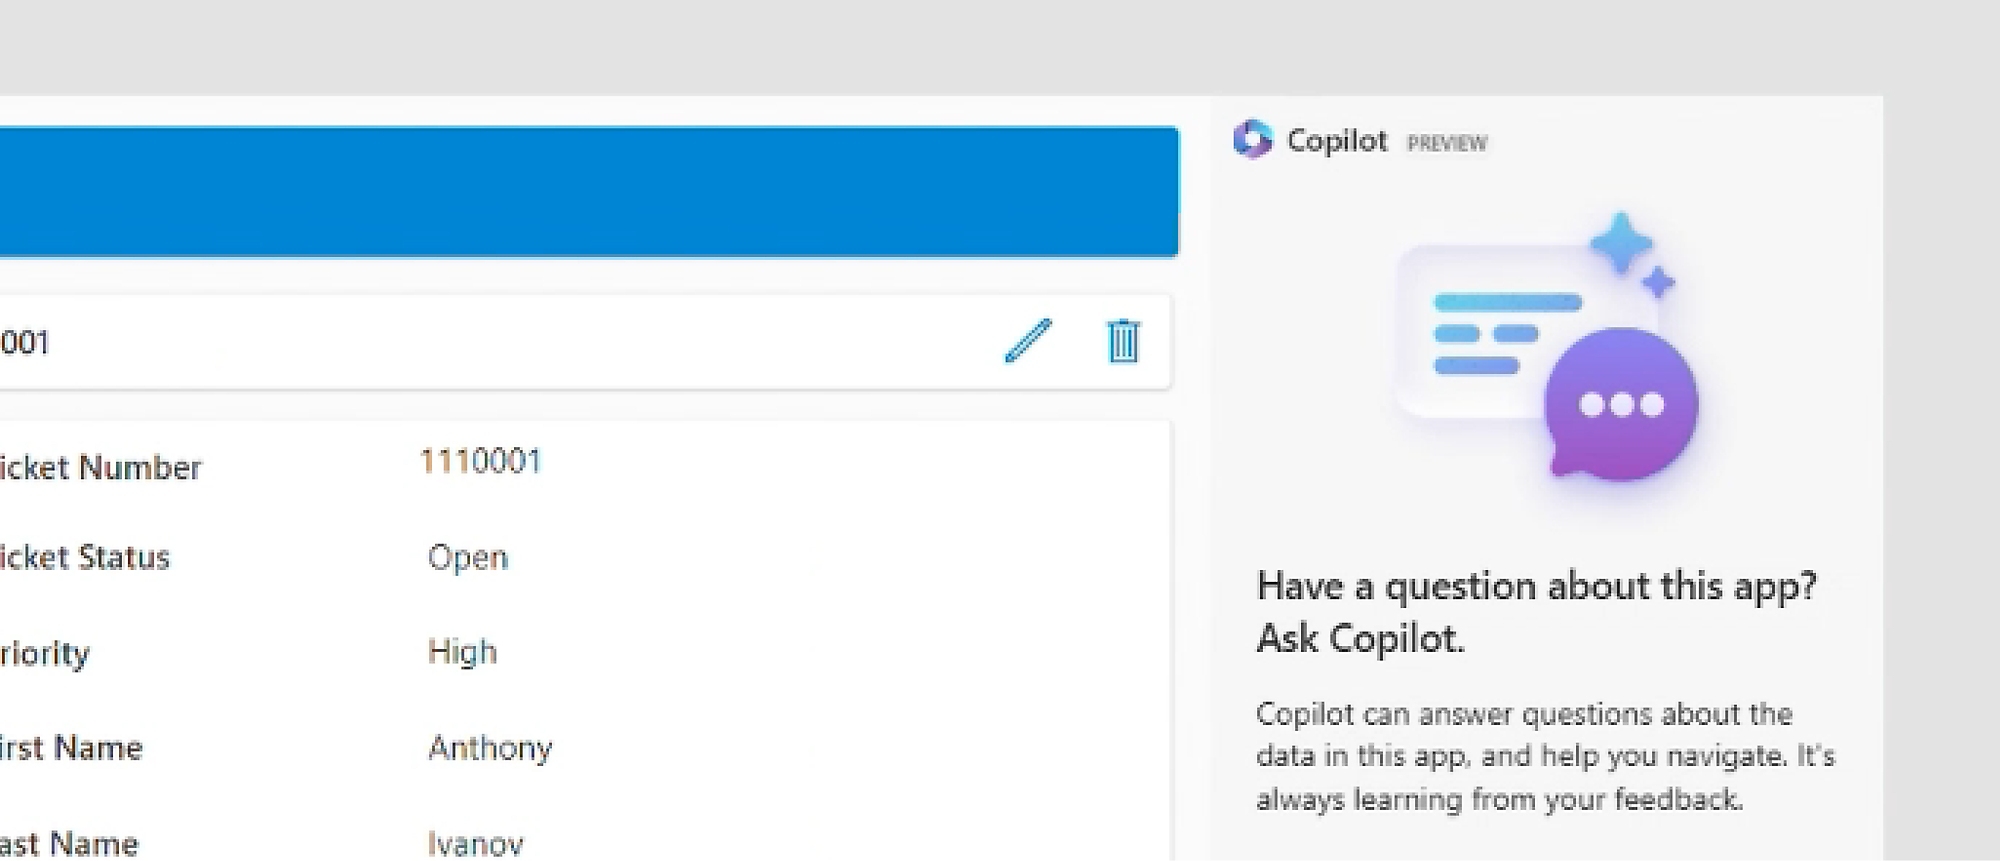 A screen shot of Copilot in Power Apps, with the user being prompted to ask Copilot questions about the app